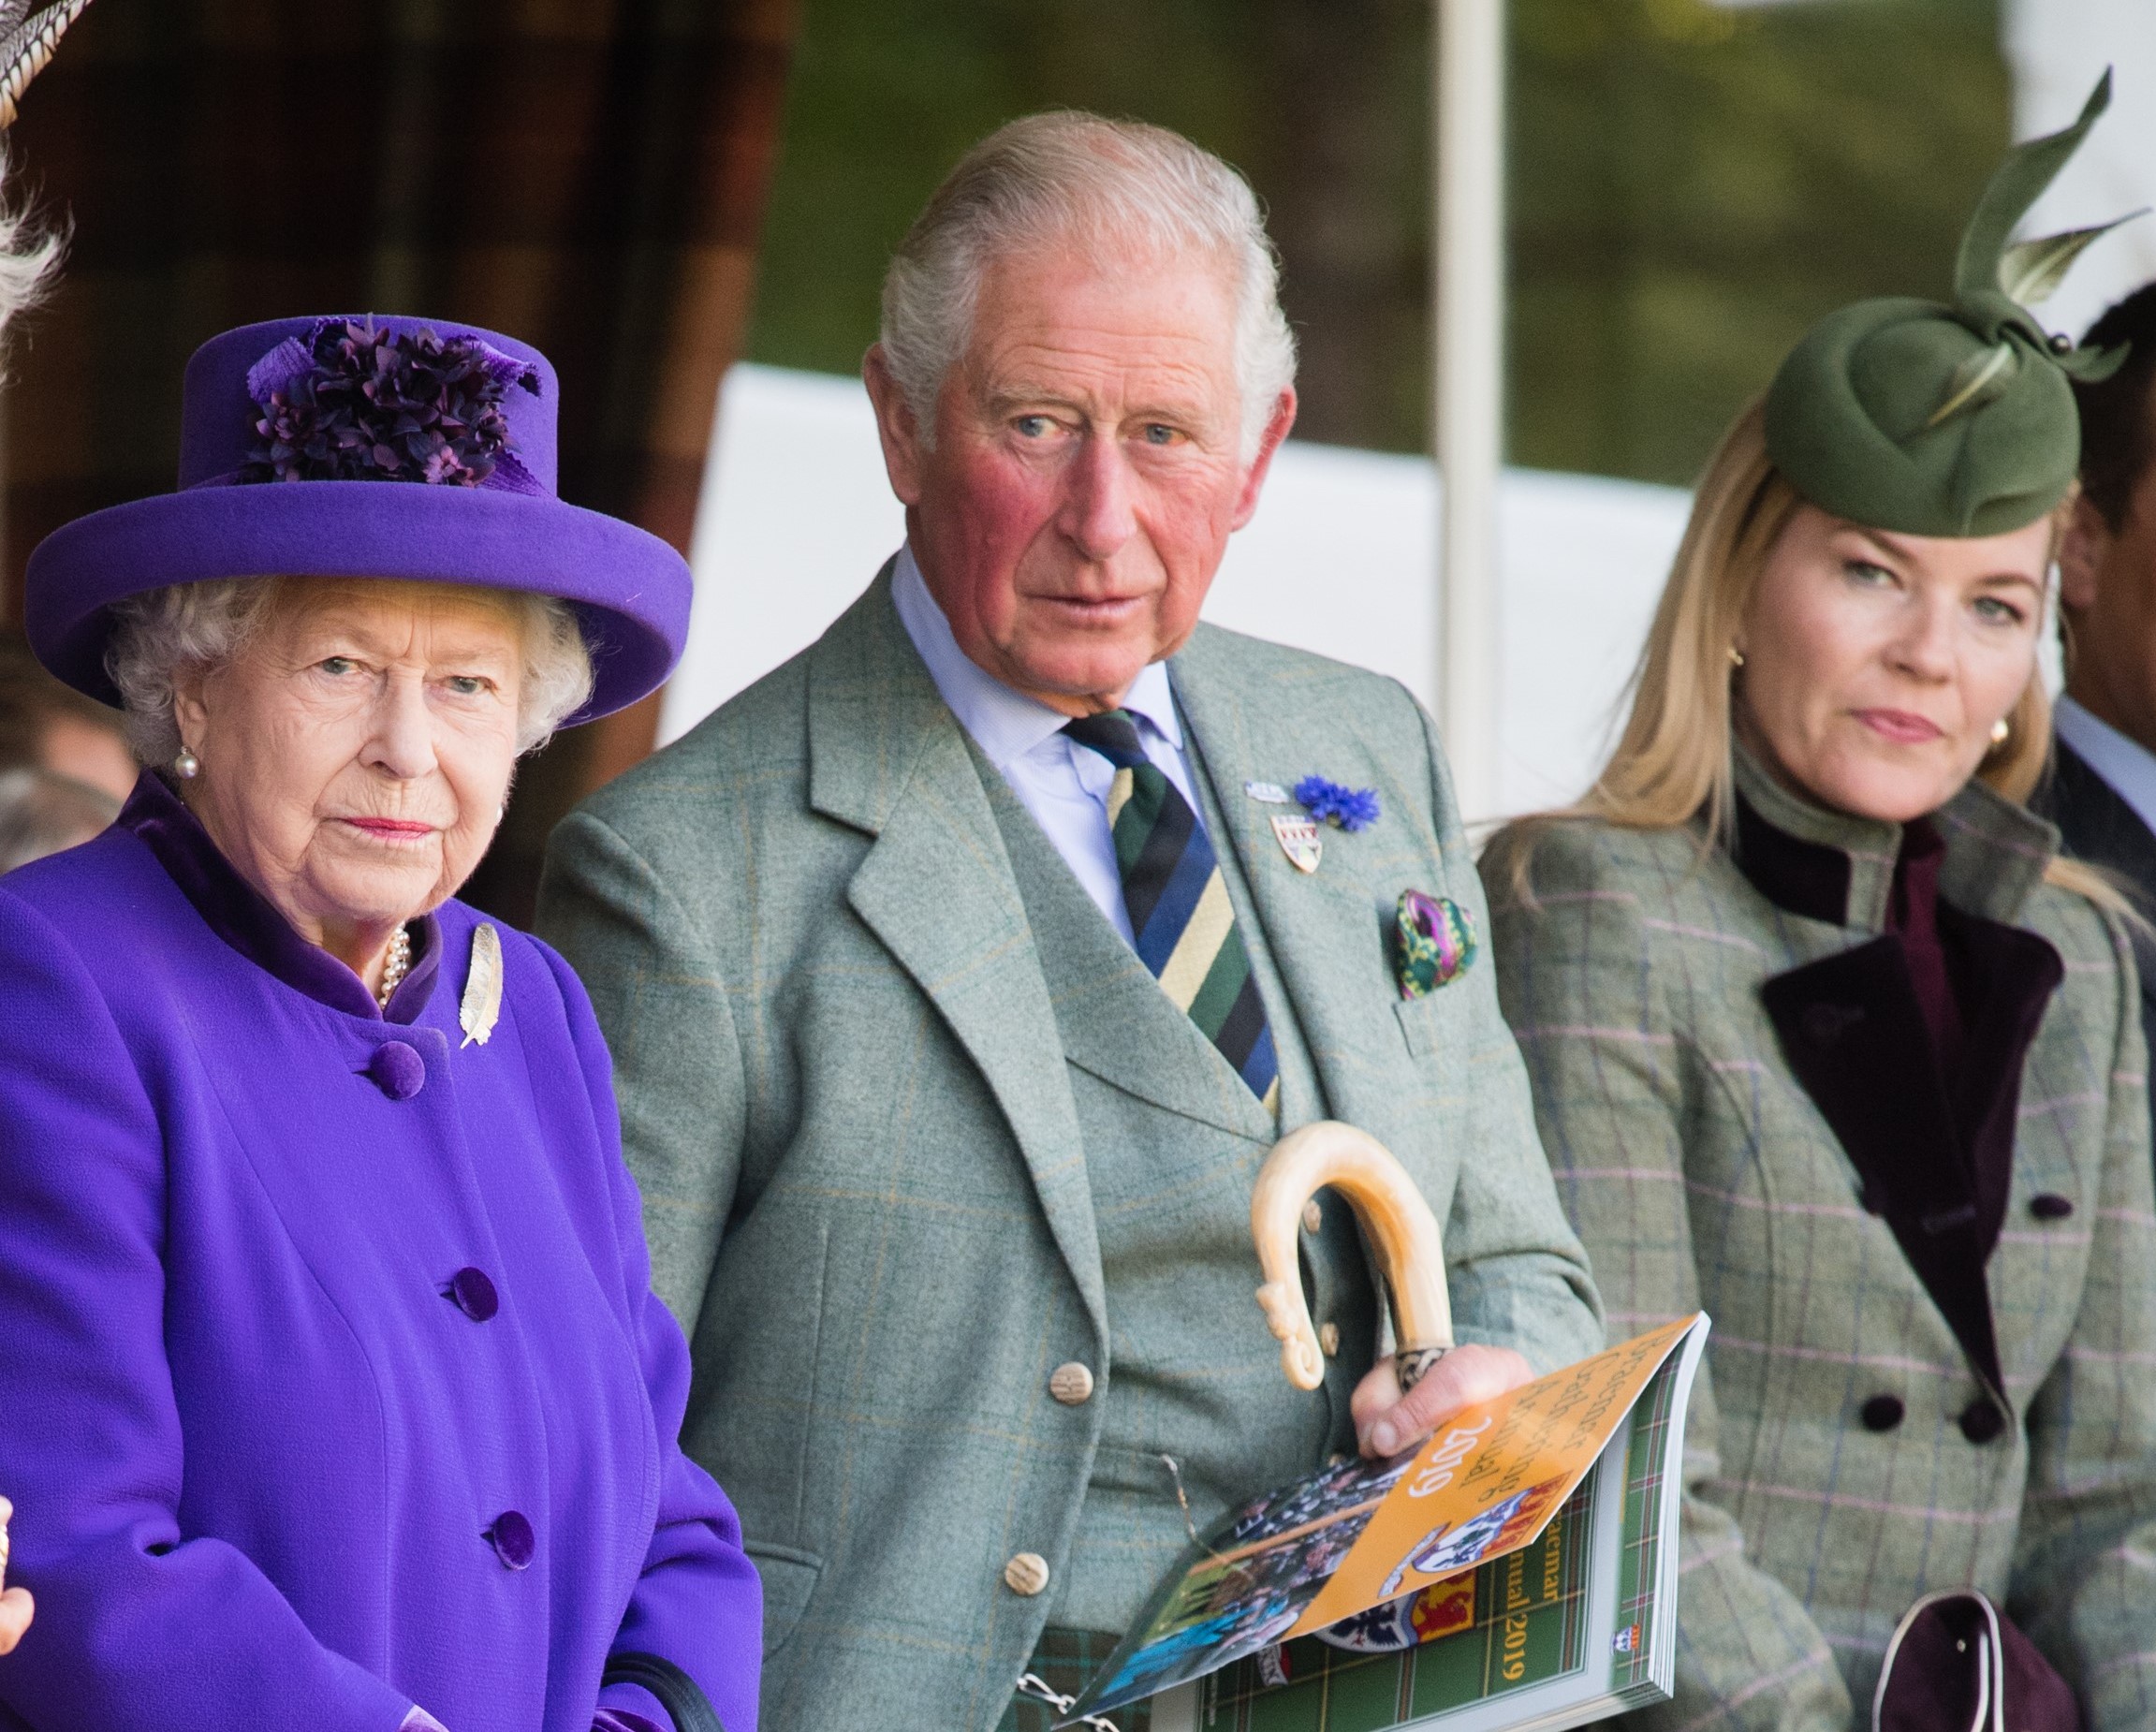 Queen Elizabeth II, Prince Charles, and Autumn Phillips